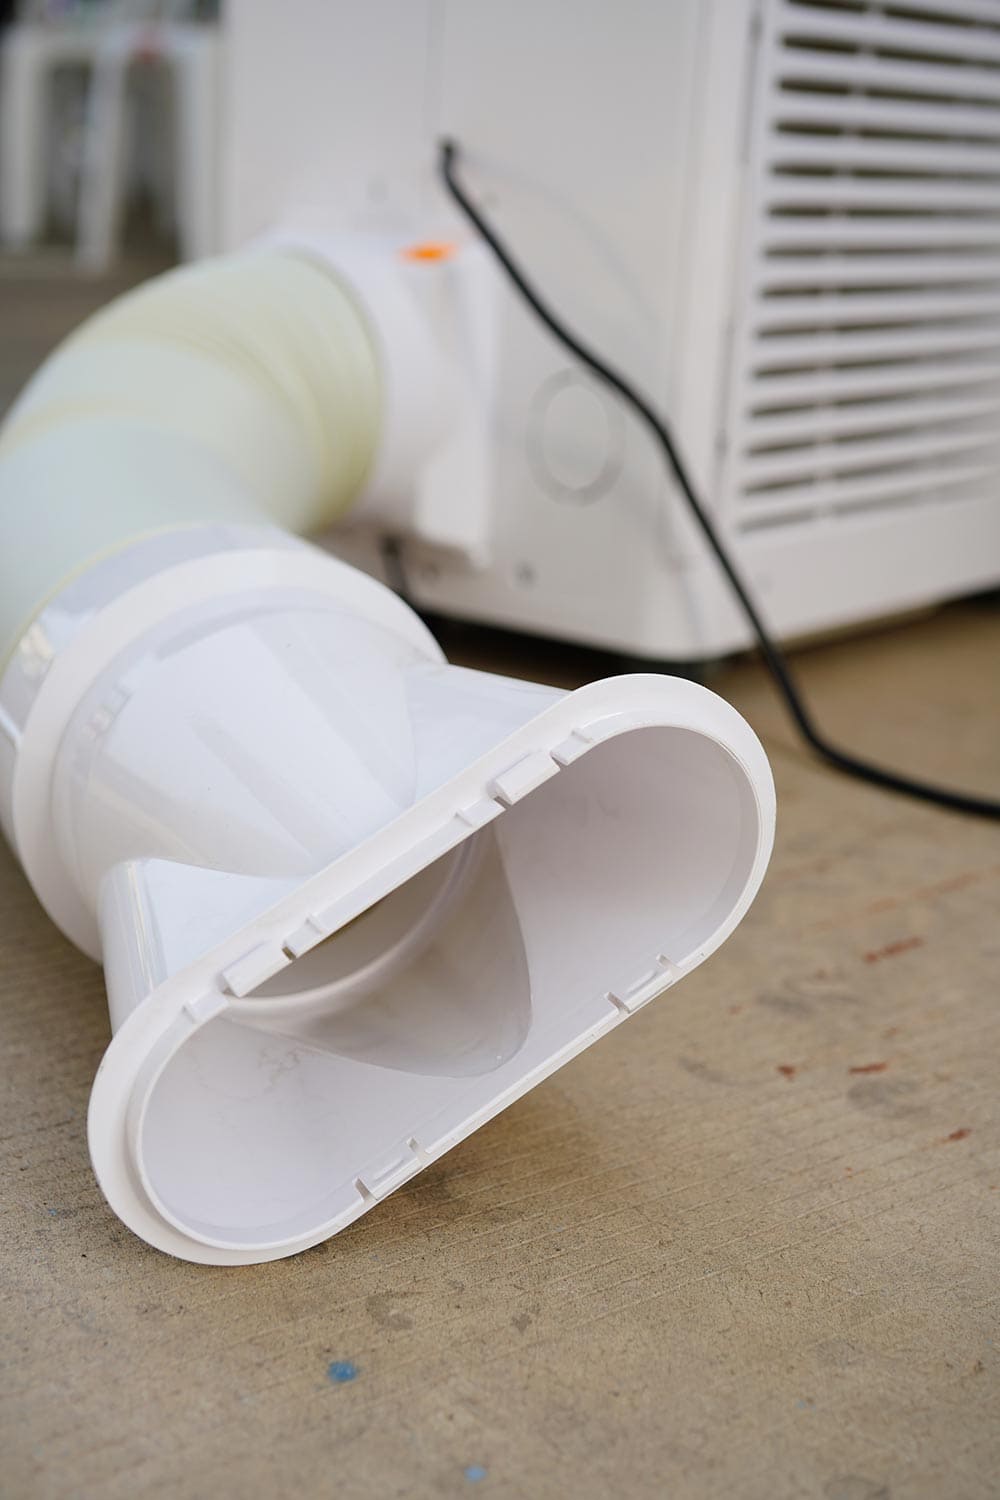 Tube of air ductwith portable air condition